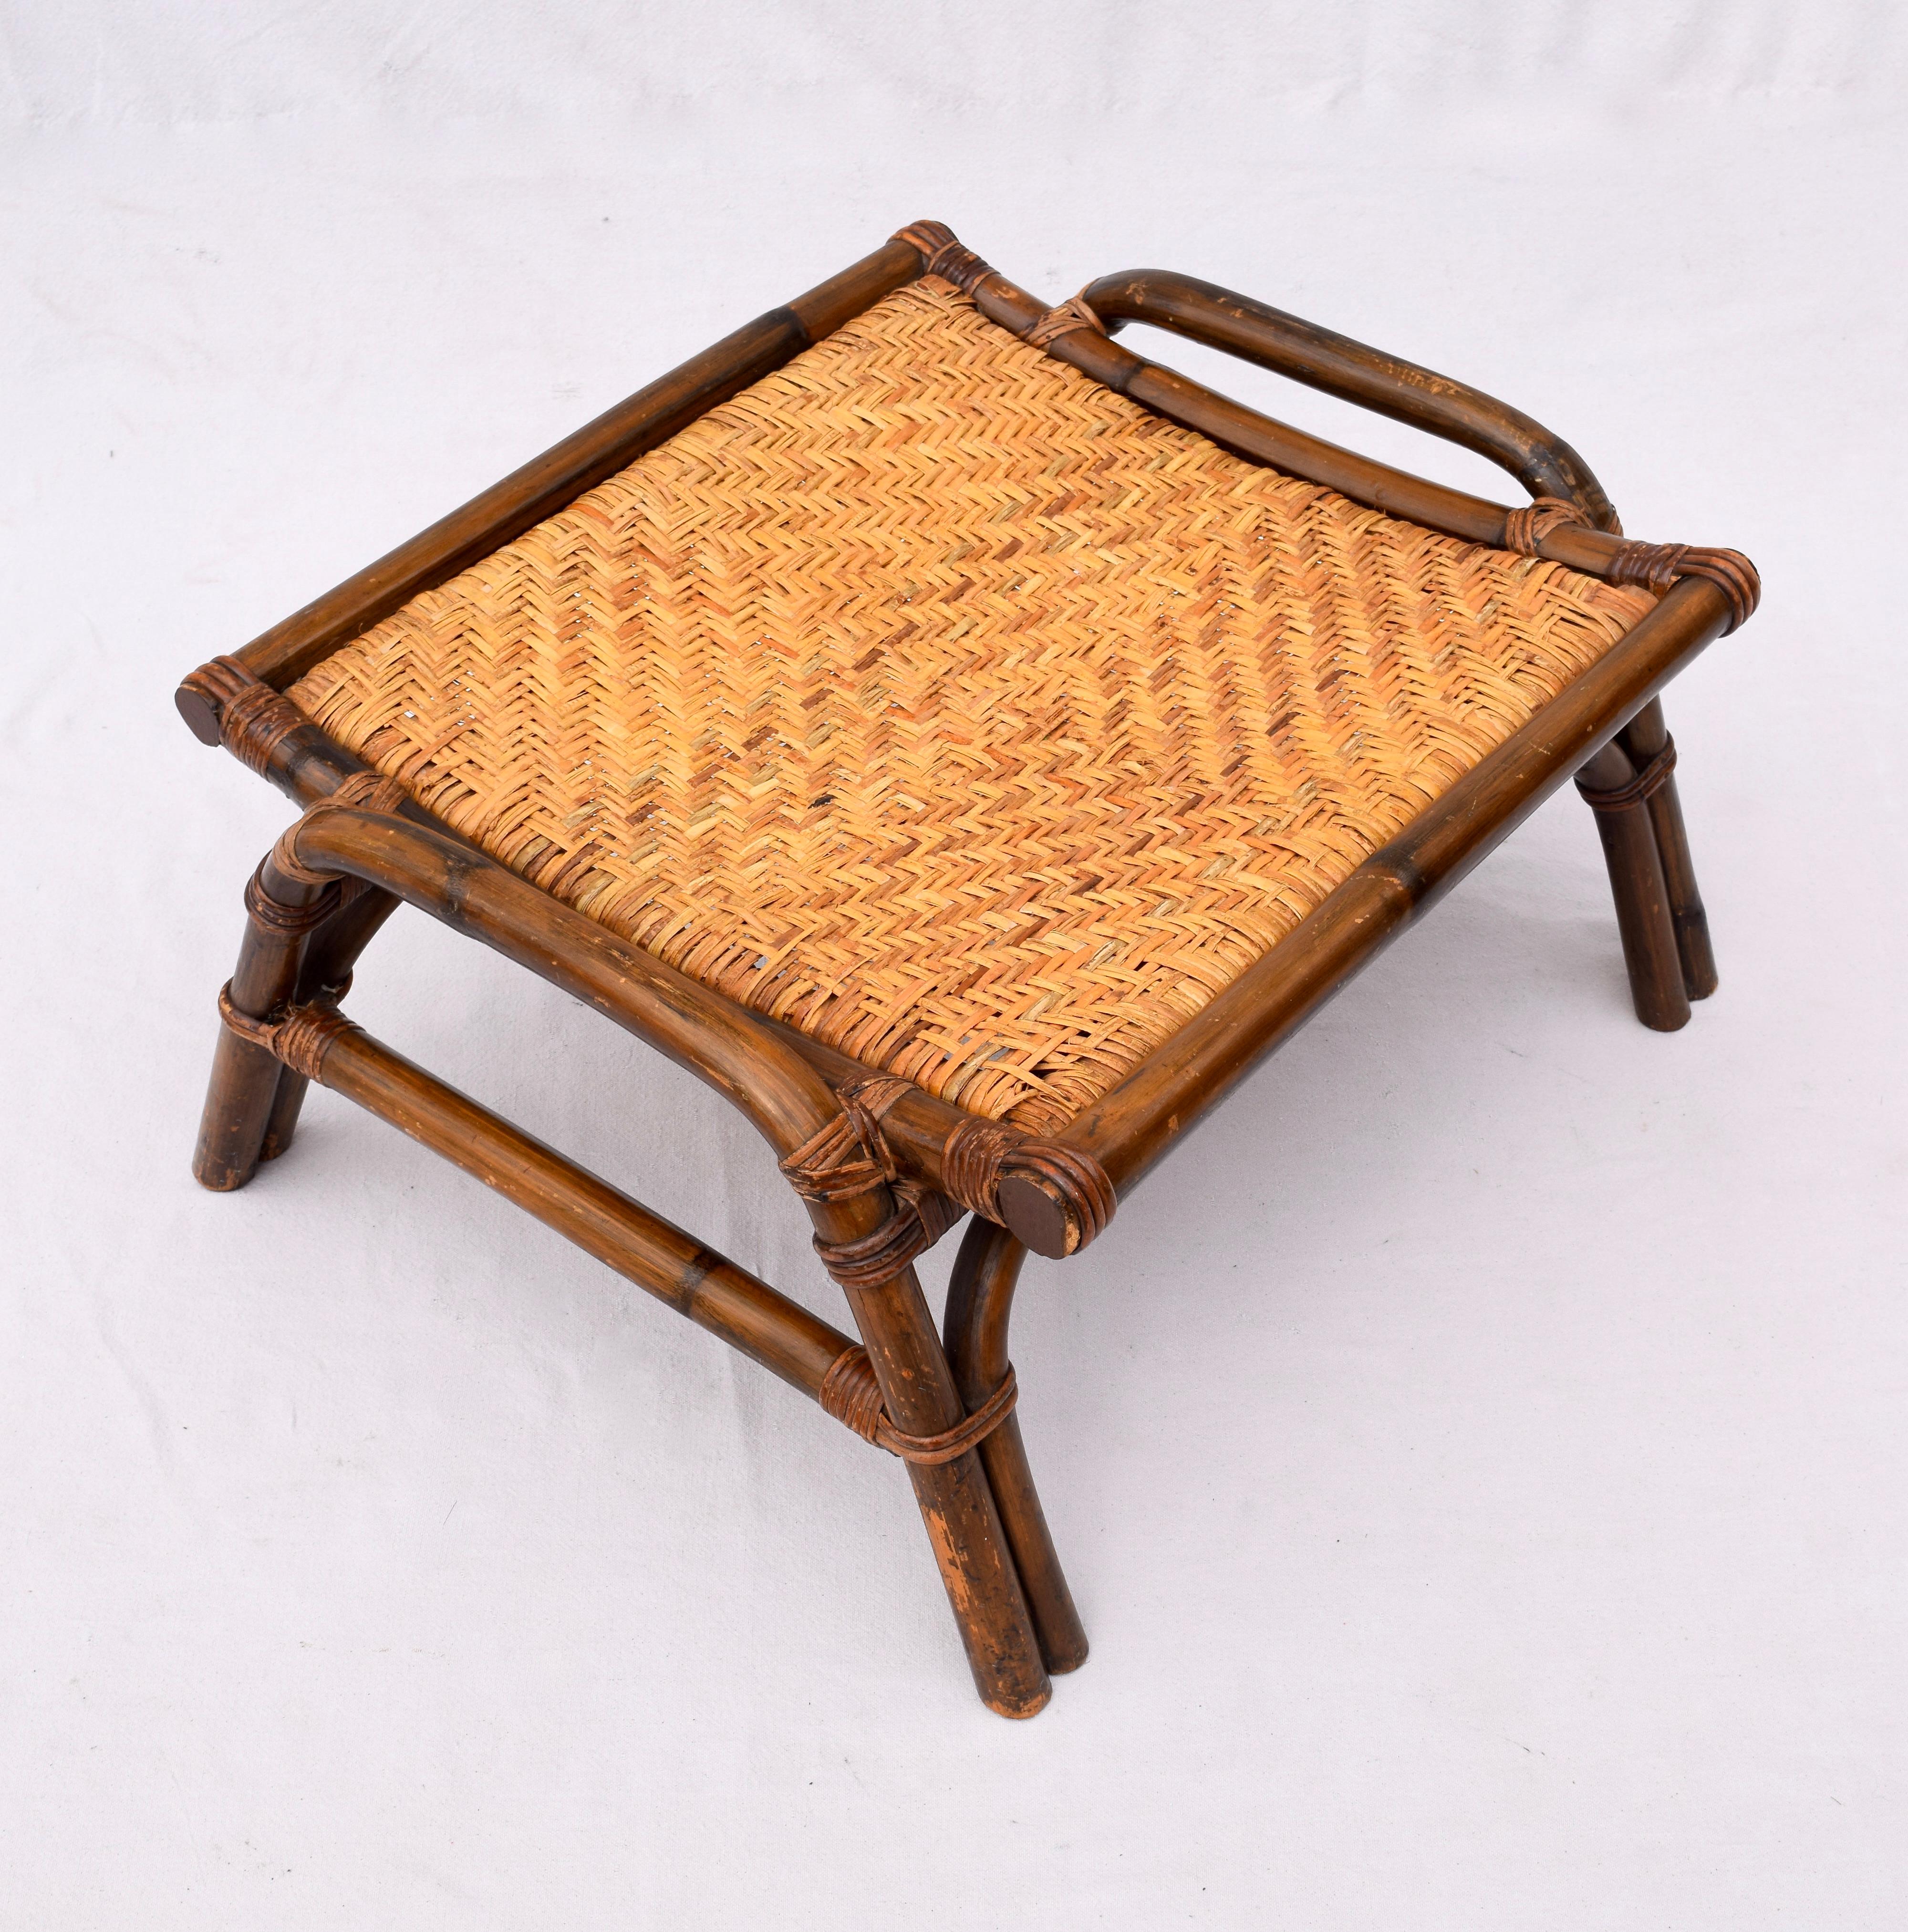 Pagoda Rattan Chairs Ottoman Set In The Manner of John Wisner Ficks Reed 1